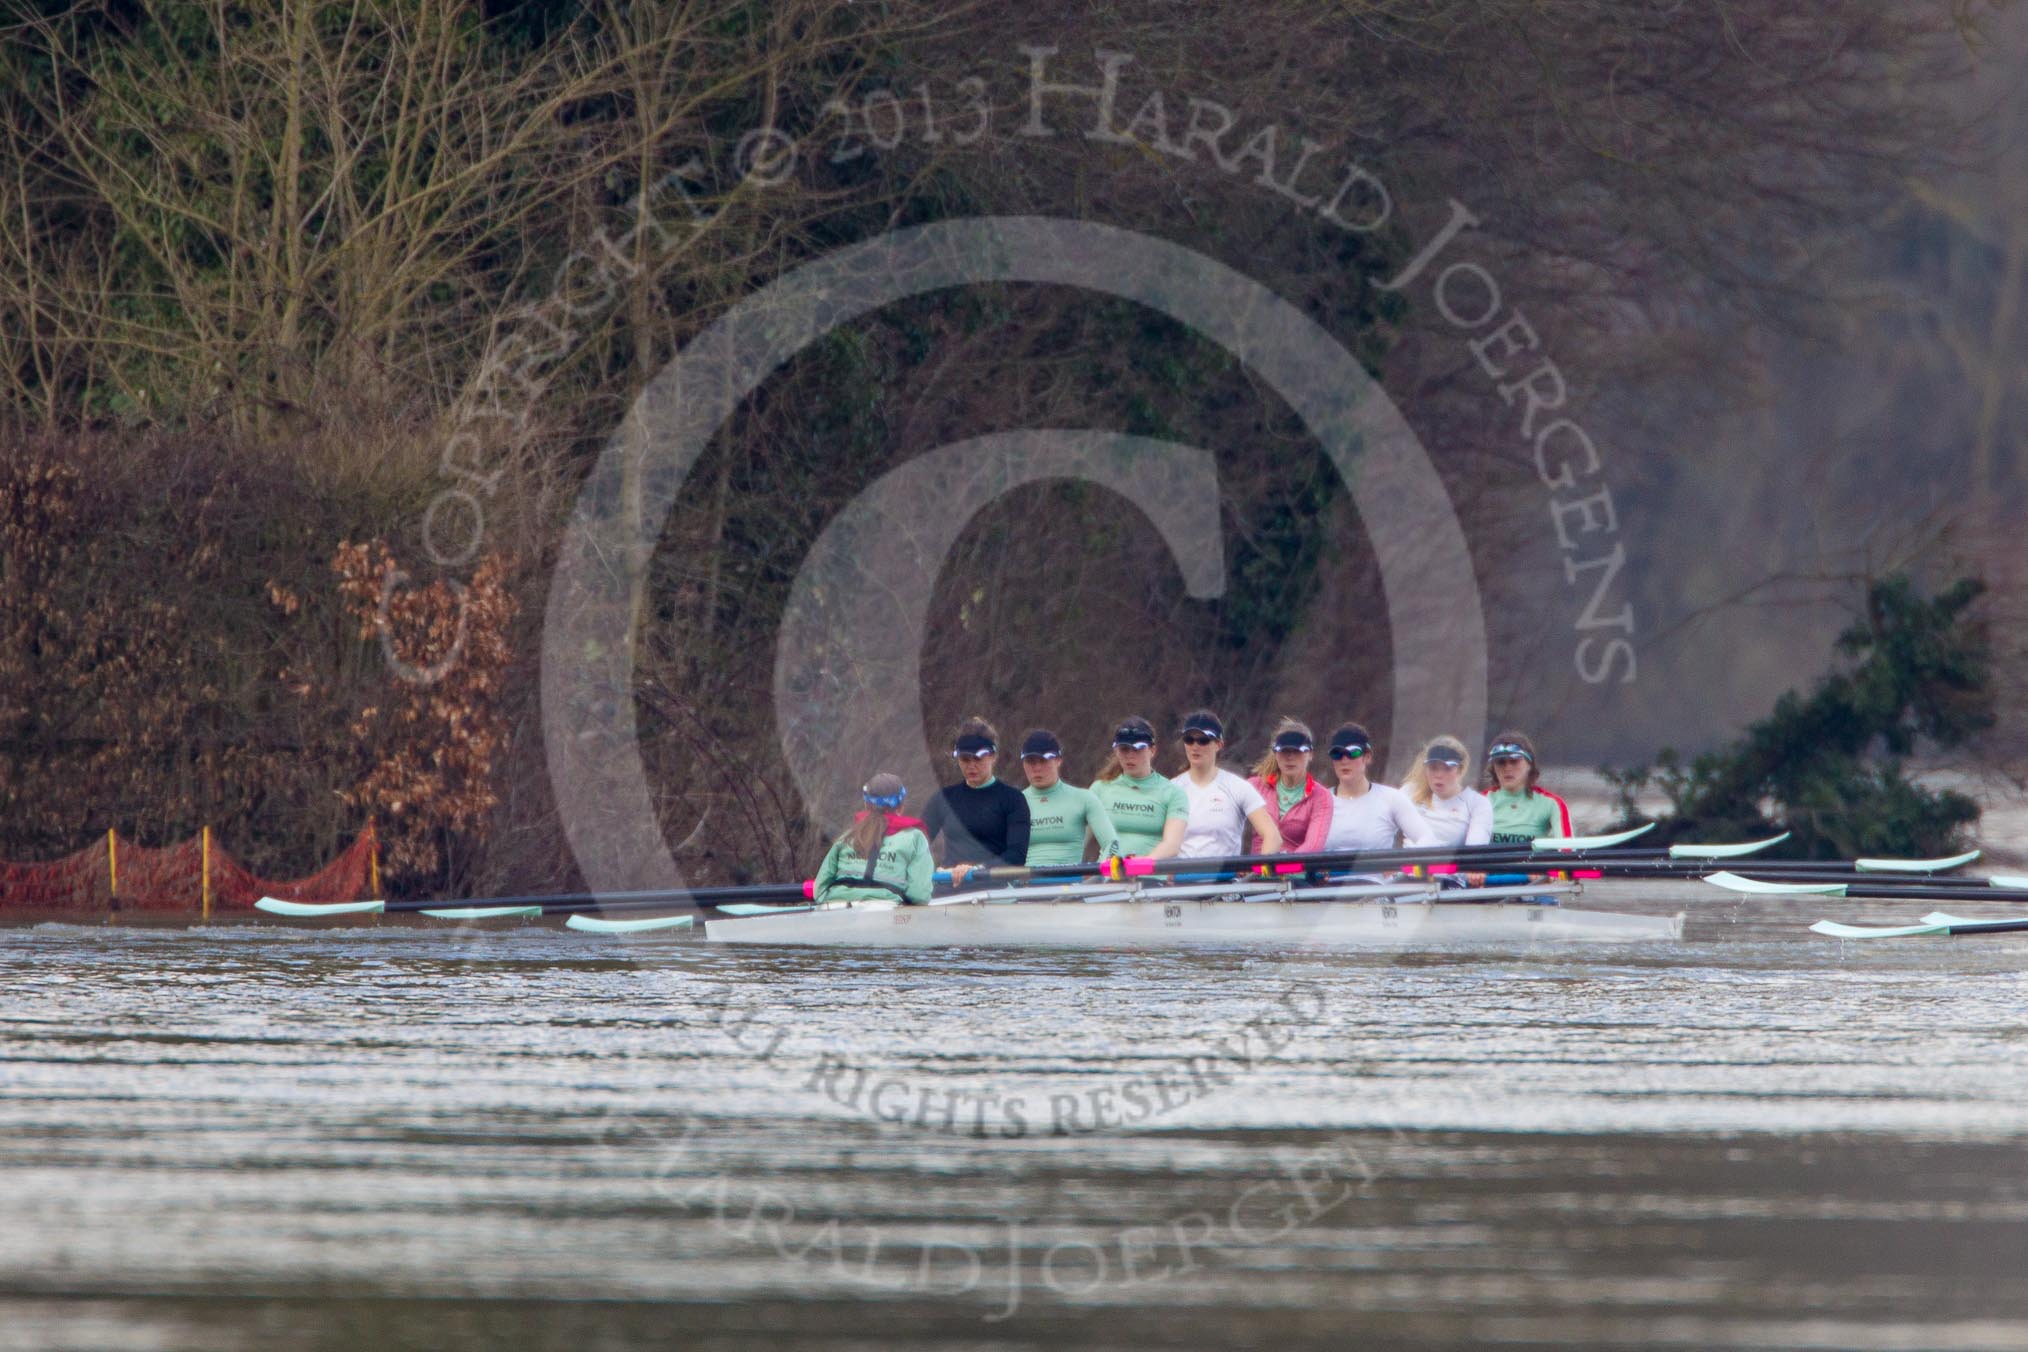 The Boat Race season 2013 - CUWBC training: The CUWBC Blue Boat rowing a loop around Temple Island: Cox Esther Momcilovic, stroke Holly Game, 7 Emily Day, 6 Claire Watkins, 5 Vicky Shaw, 4  Jessica Denman, 3 Melissa Wilson, 2 Fay Sandford, and bow Caroline Reid..
River Thames near Remenham,
Henley-on-Thames,
Oxfordshire,
United Kingdom,
on 19 March 2013 at 15:33, image #47